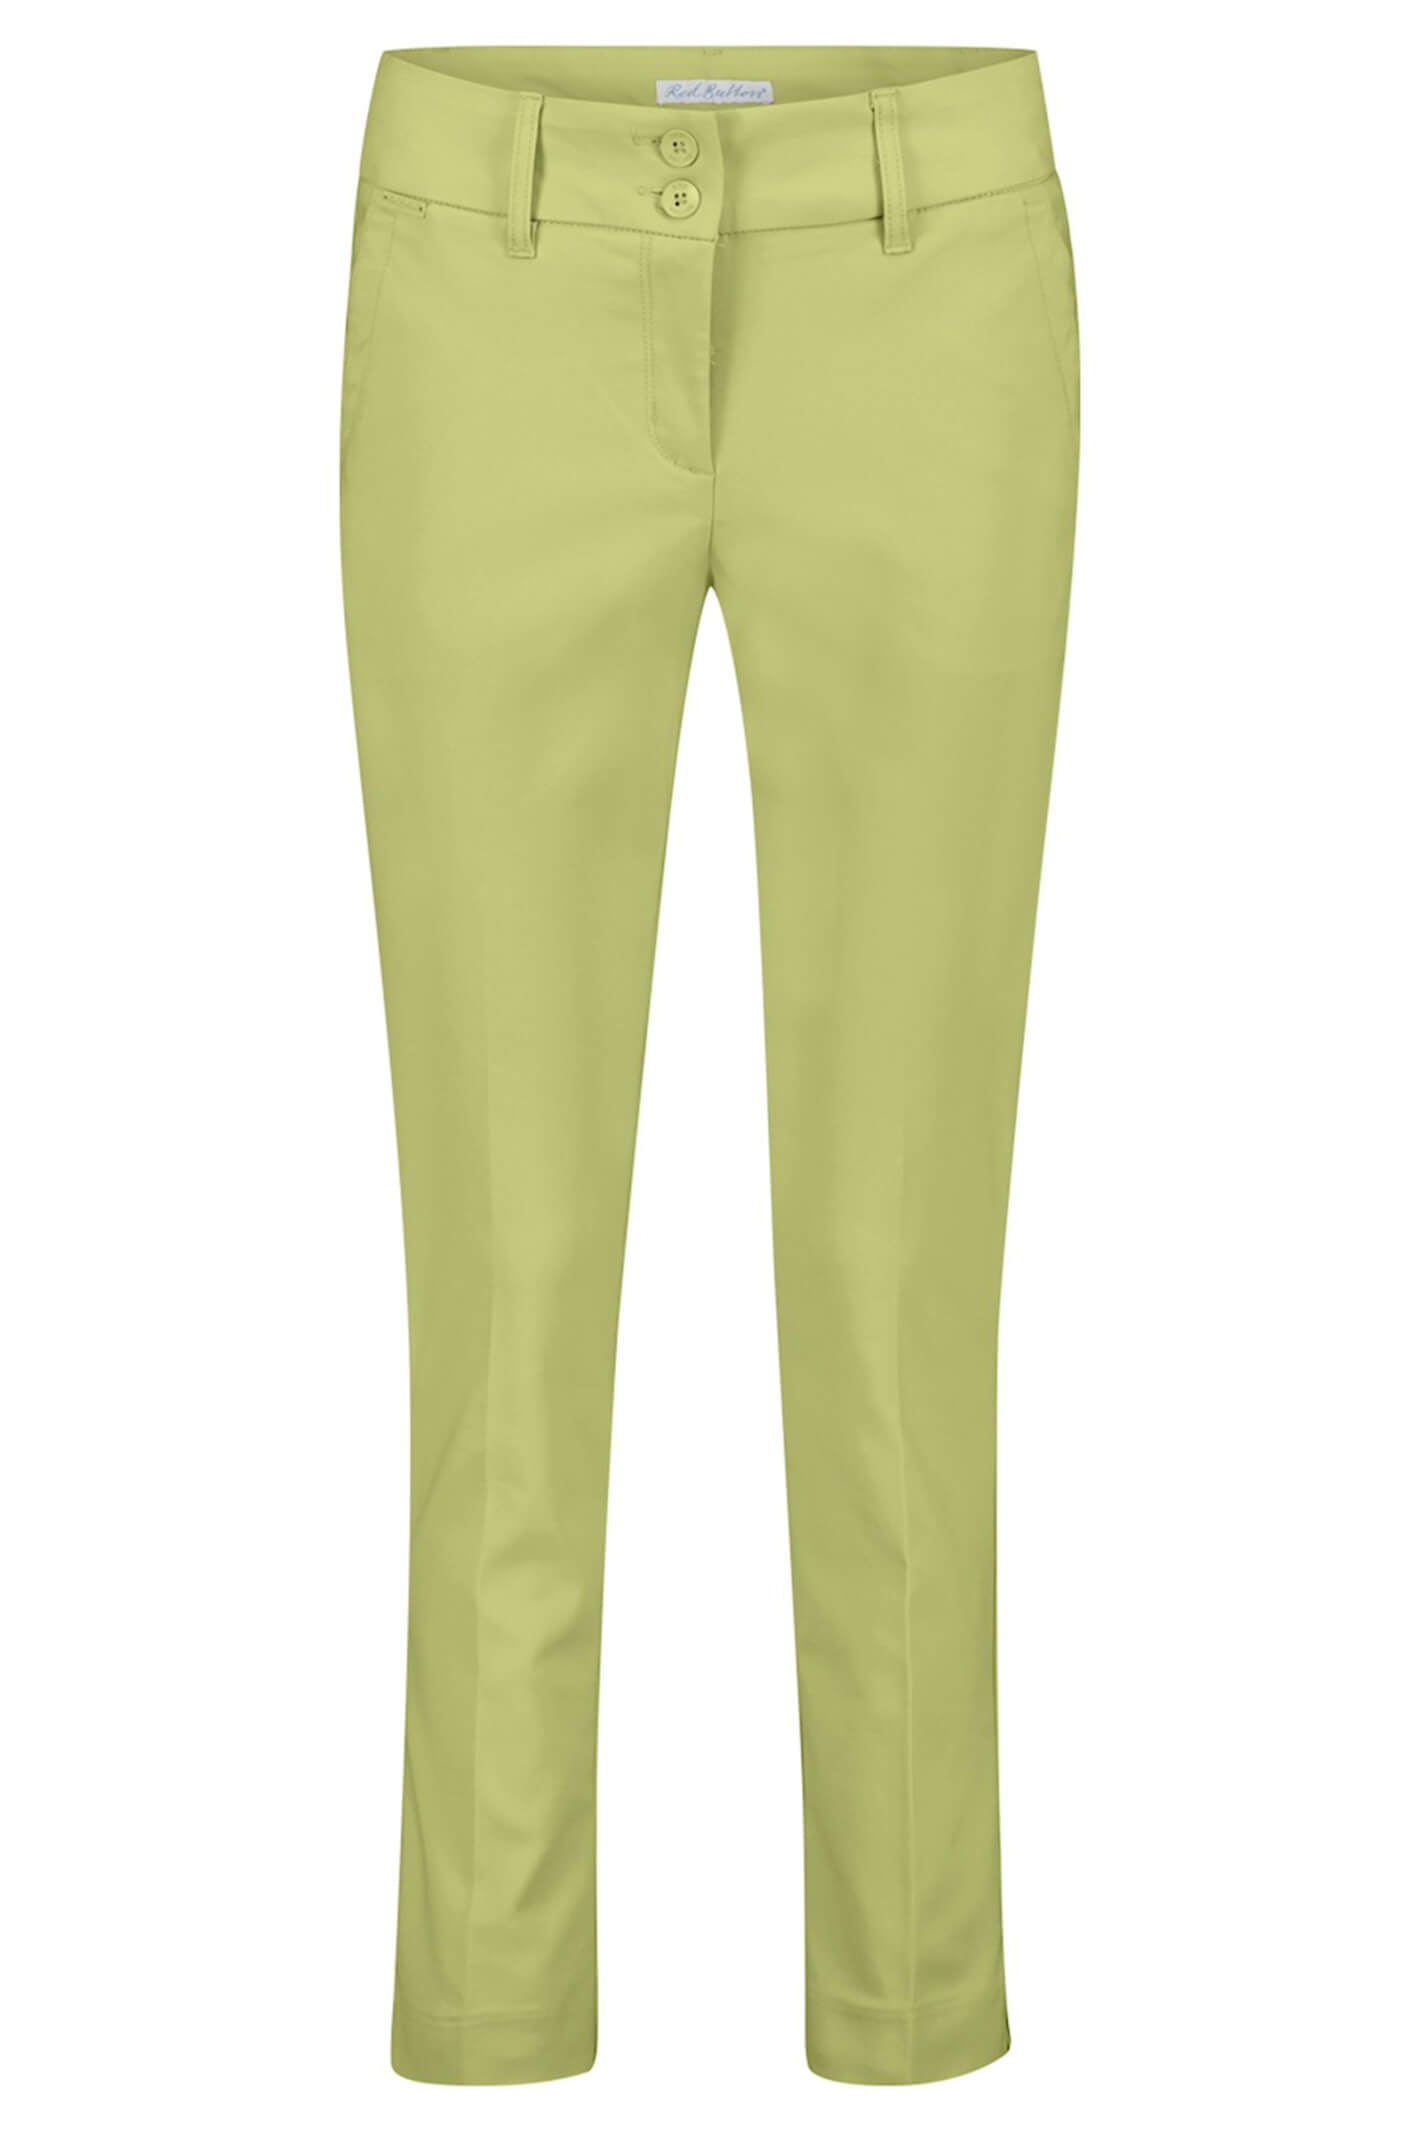 Red Button SRB3944 Diana Kiwi Green Smart Colour Trousers